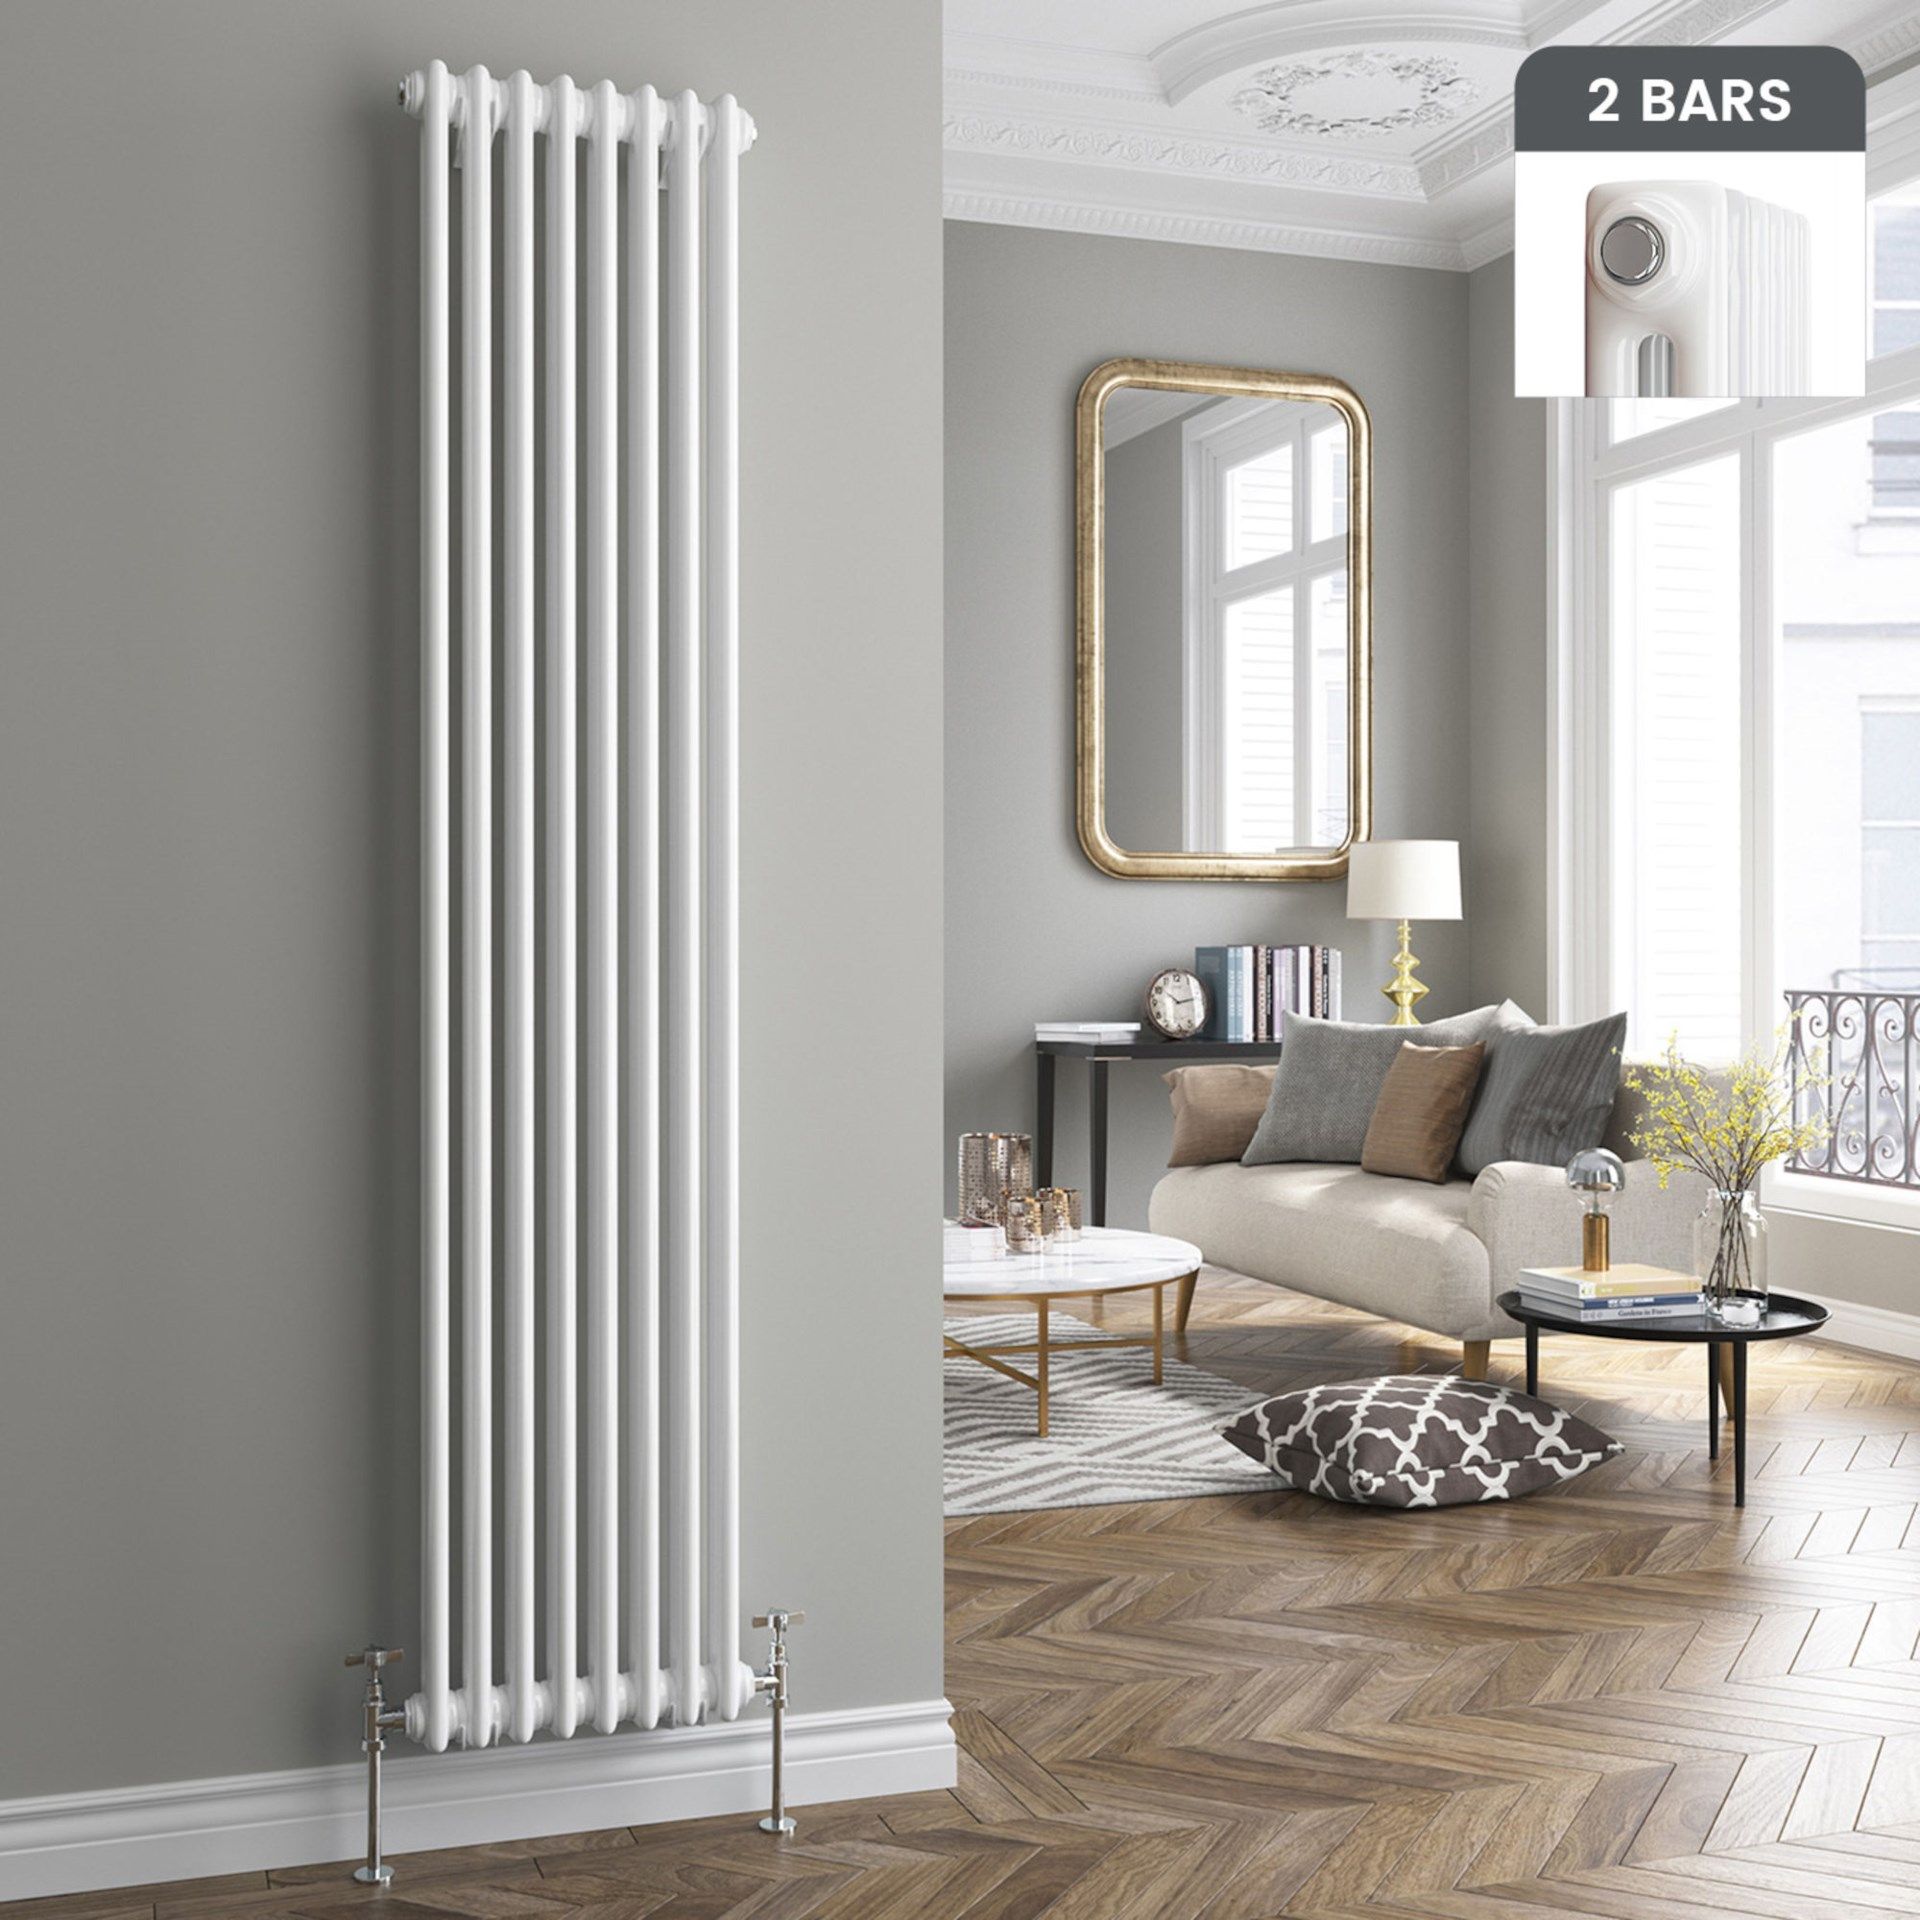 (PC120) 2000x490mm White Double Panel Vertical Colosseum Traditional Radiator. Made from low ca...(